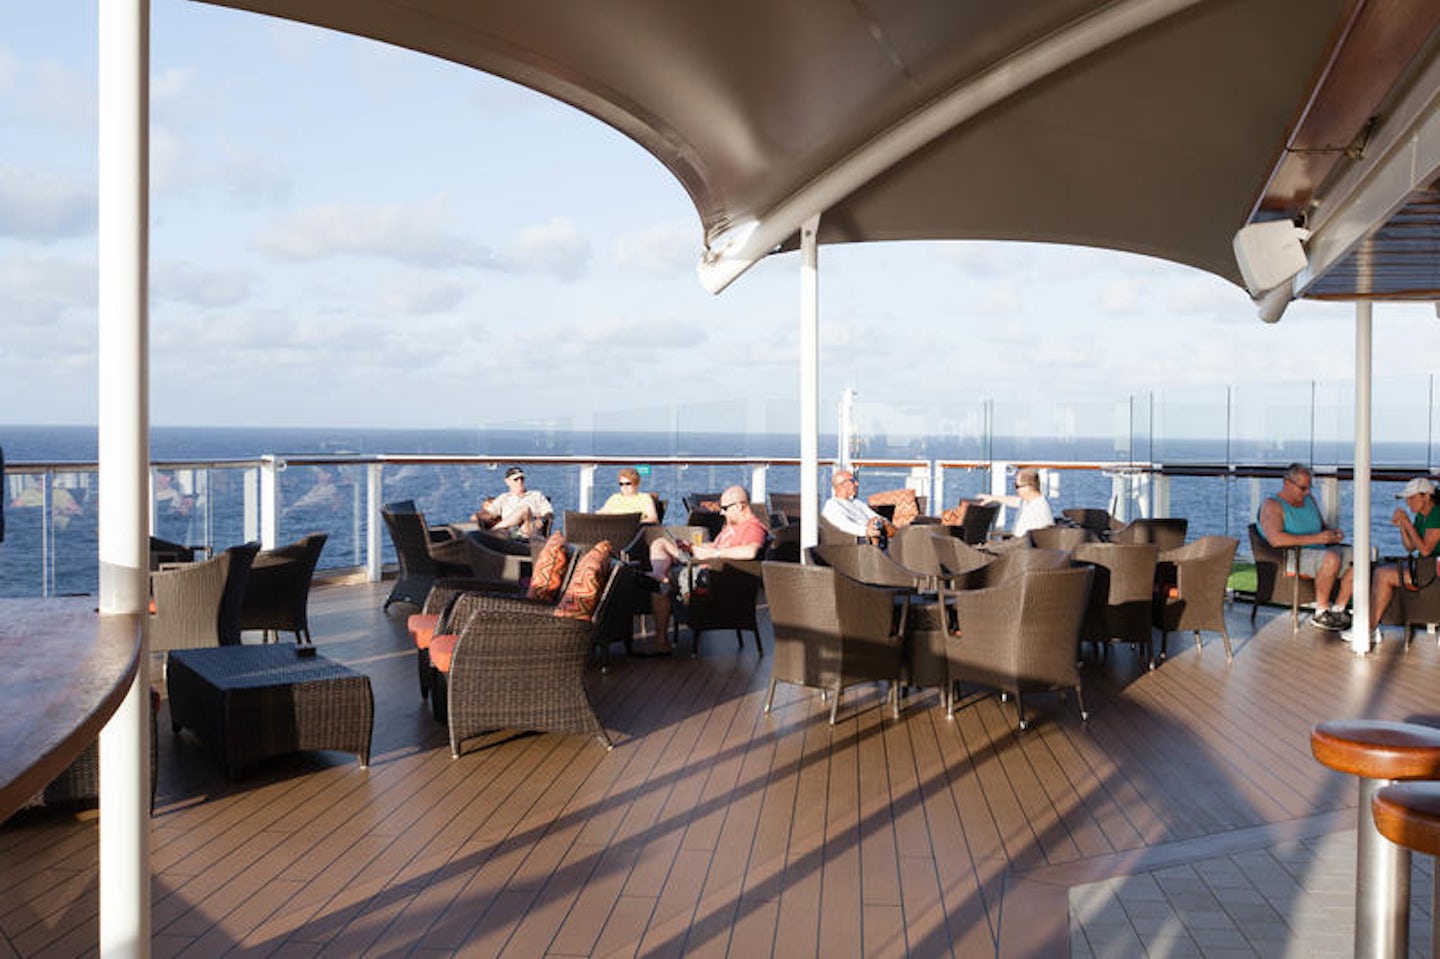 The Sunset Bar on Celebrity Silhouette